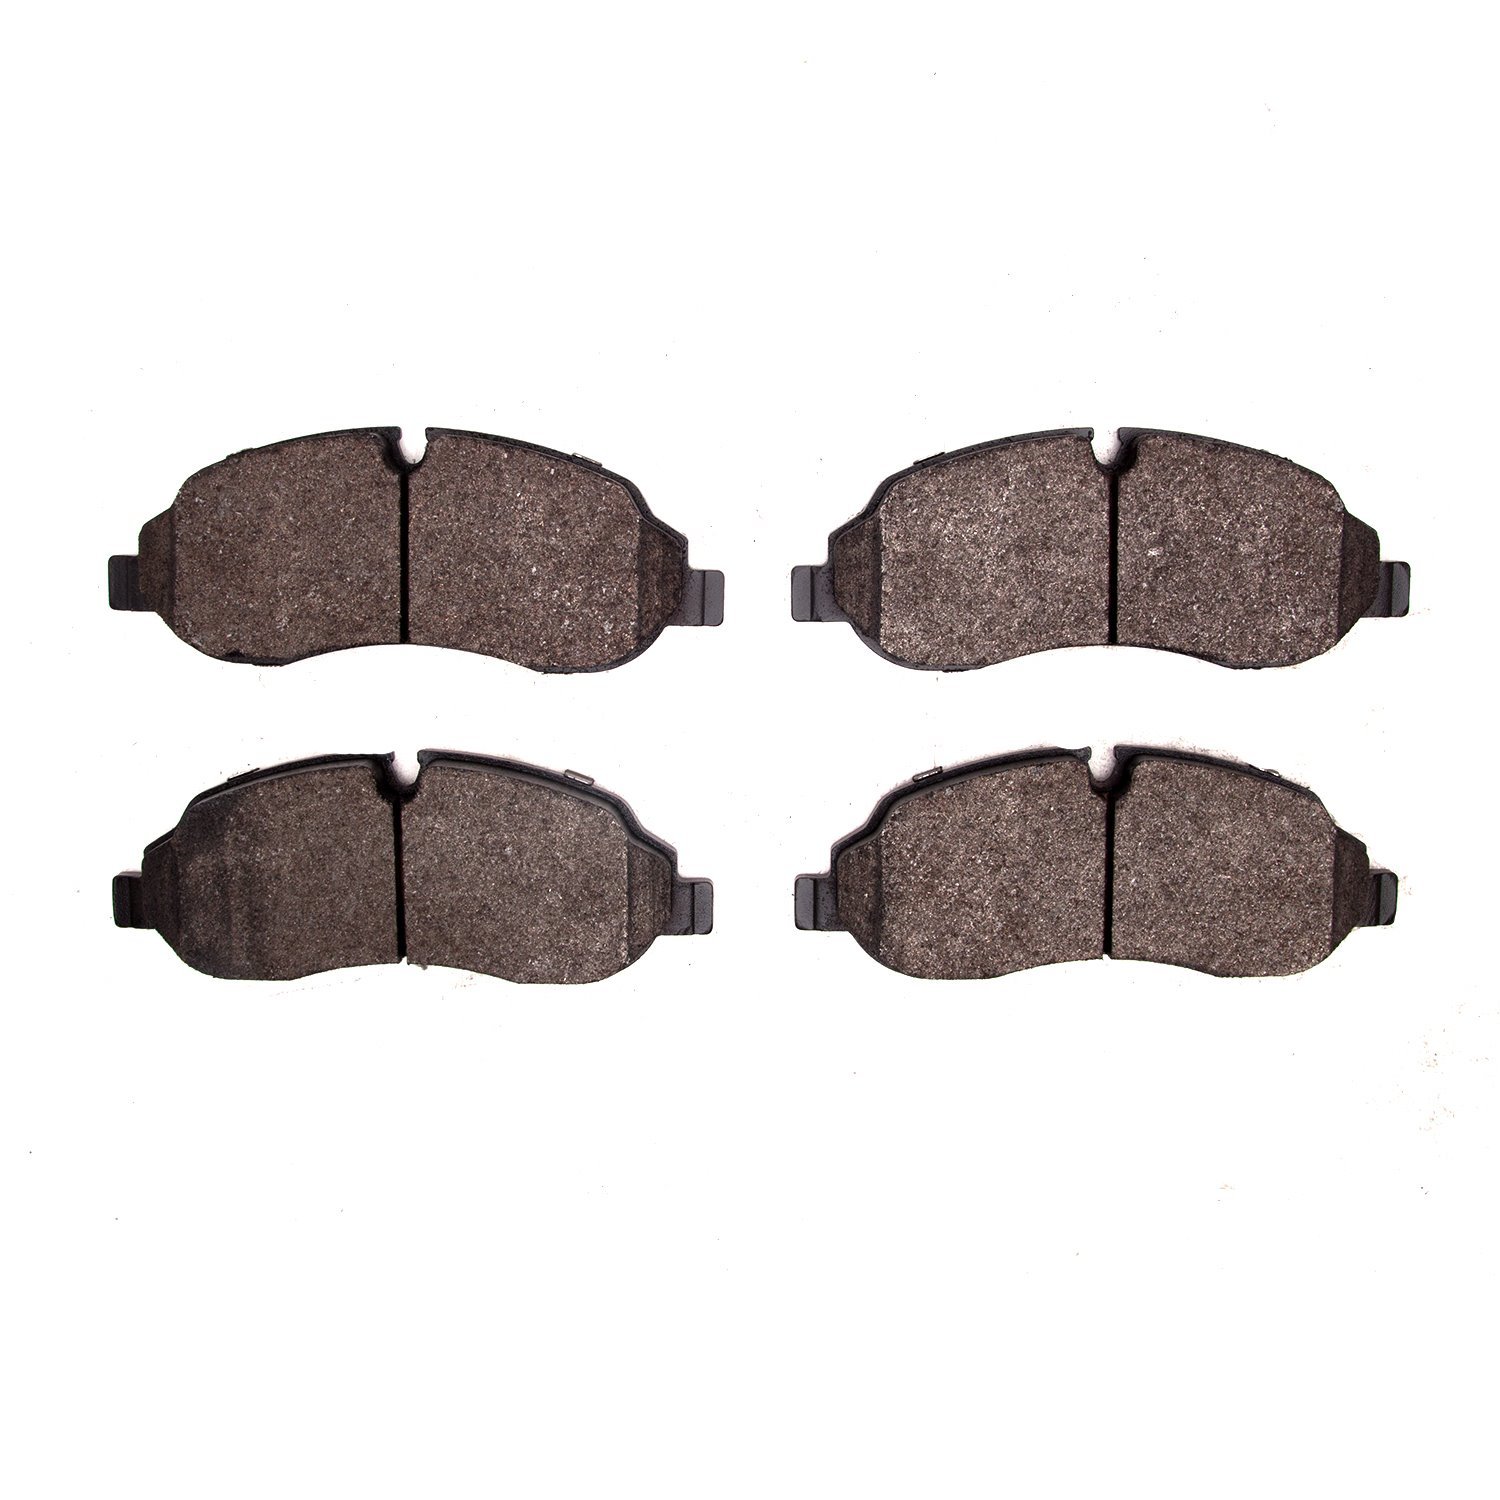 Super-Duty Brake Pads, Fits Select Ford/Lincoln/Mercury/Mazda, Position: Front